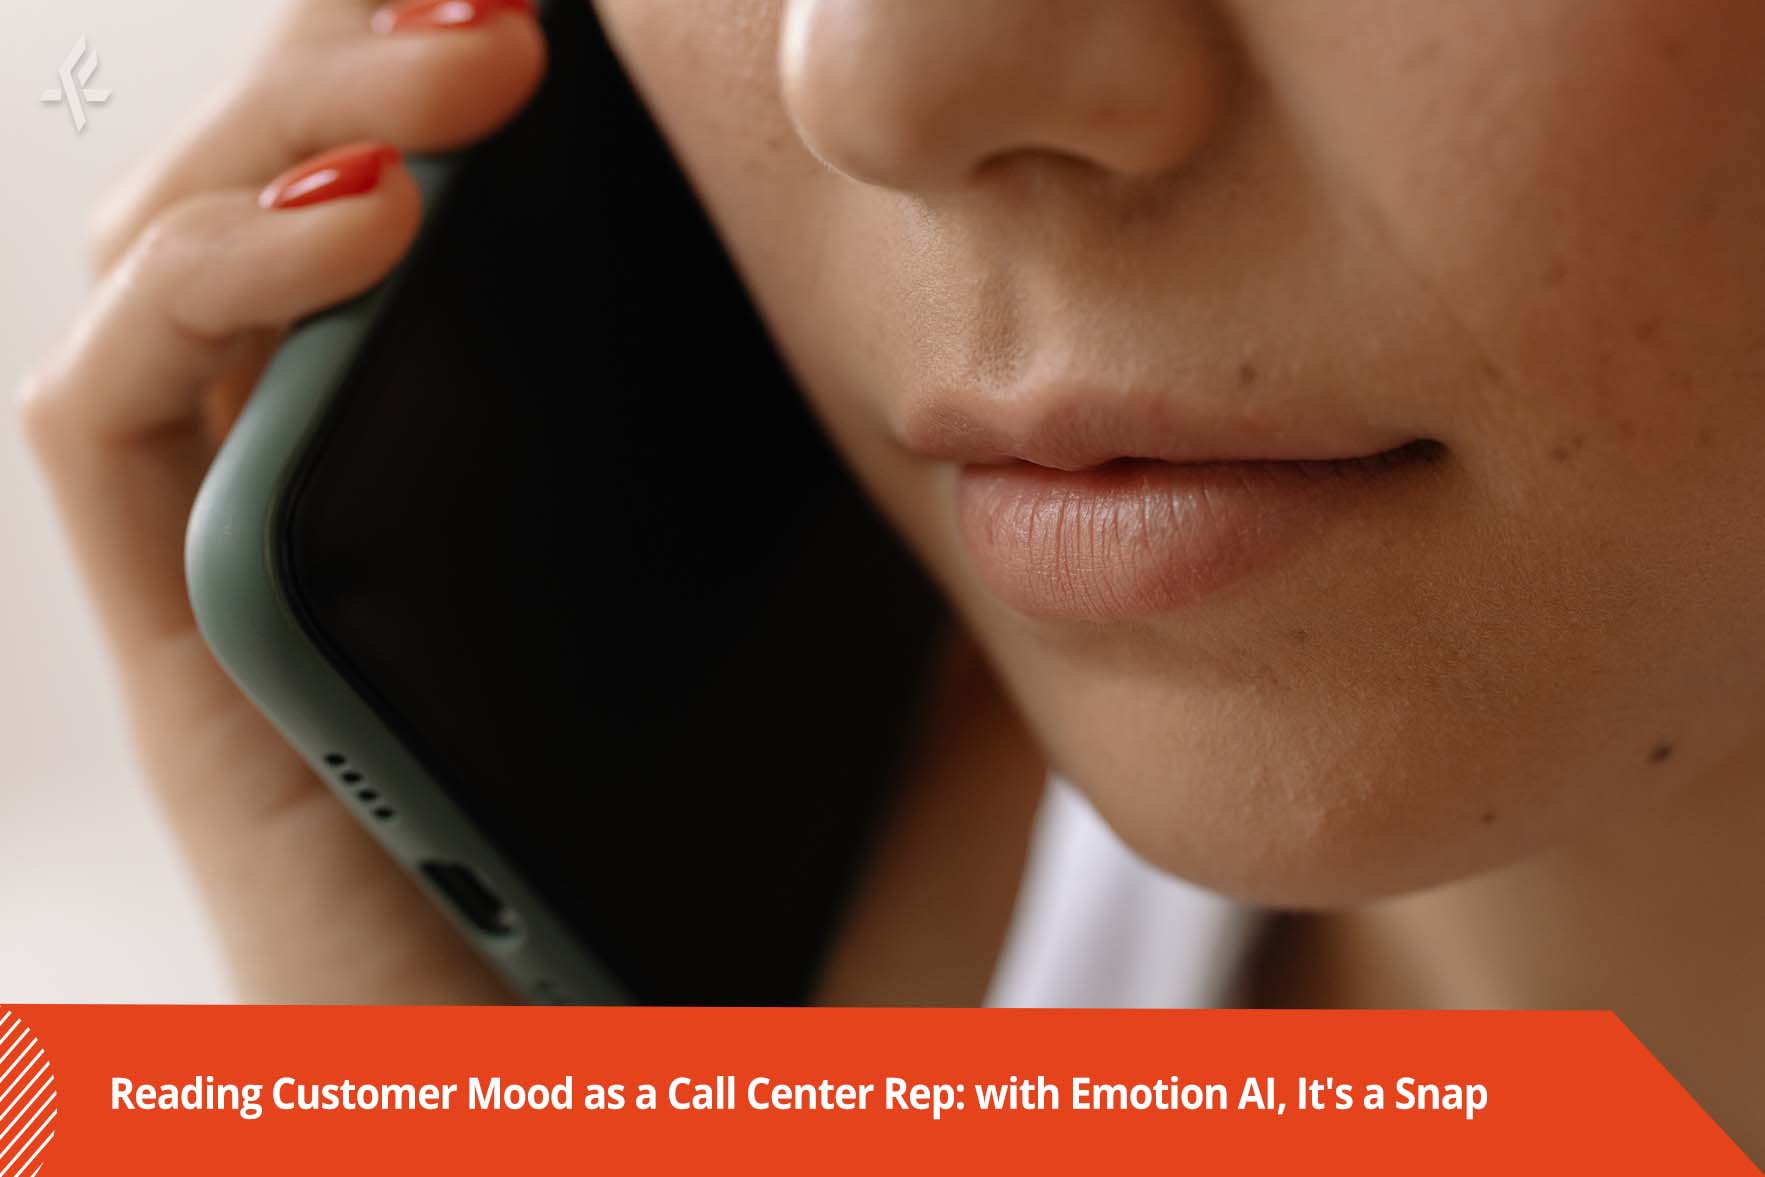 Reading Customer Mood as a Call Center Rep: with Emotion AI, It’s a Snap